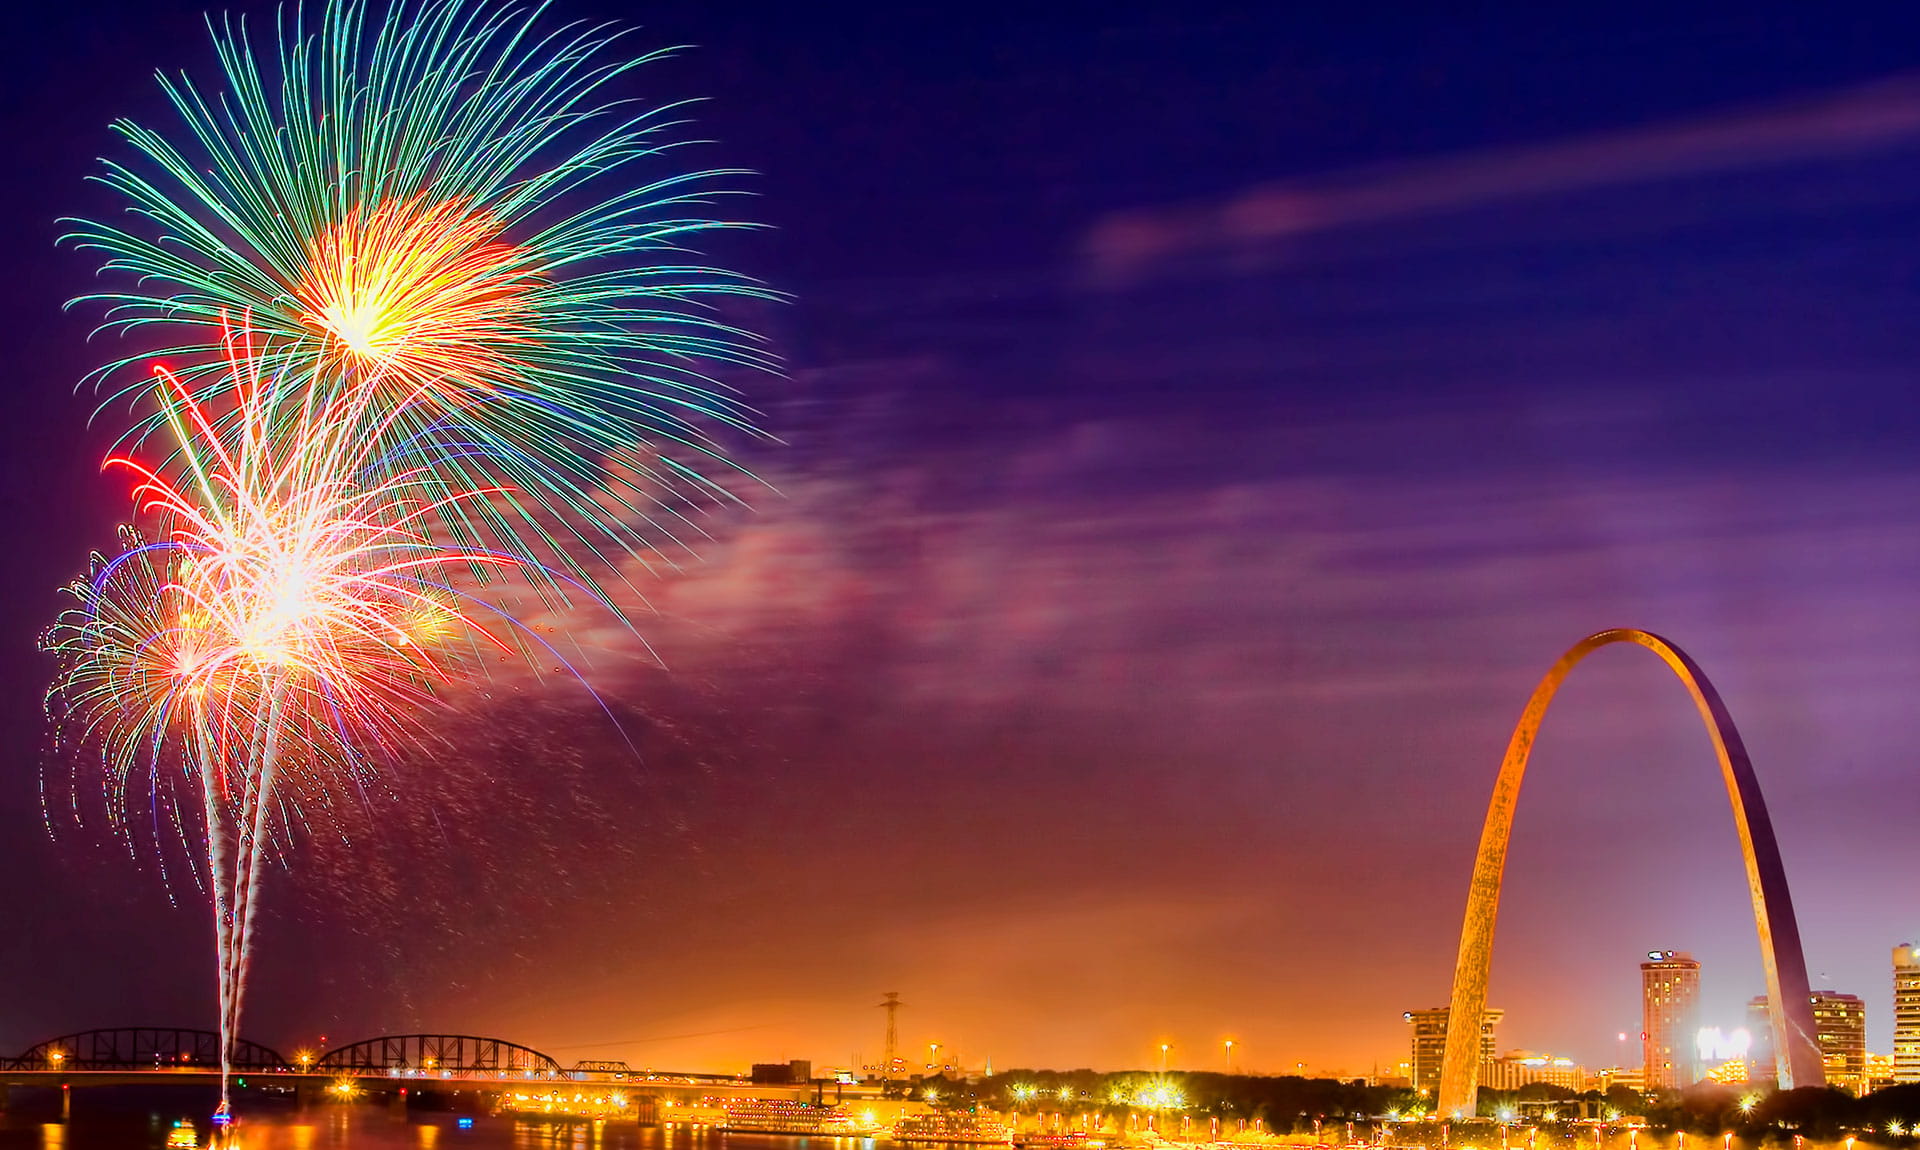 Fireworks at St. Louis